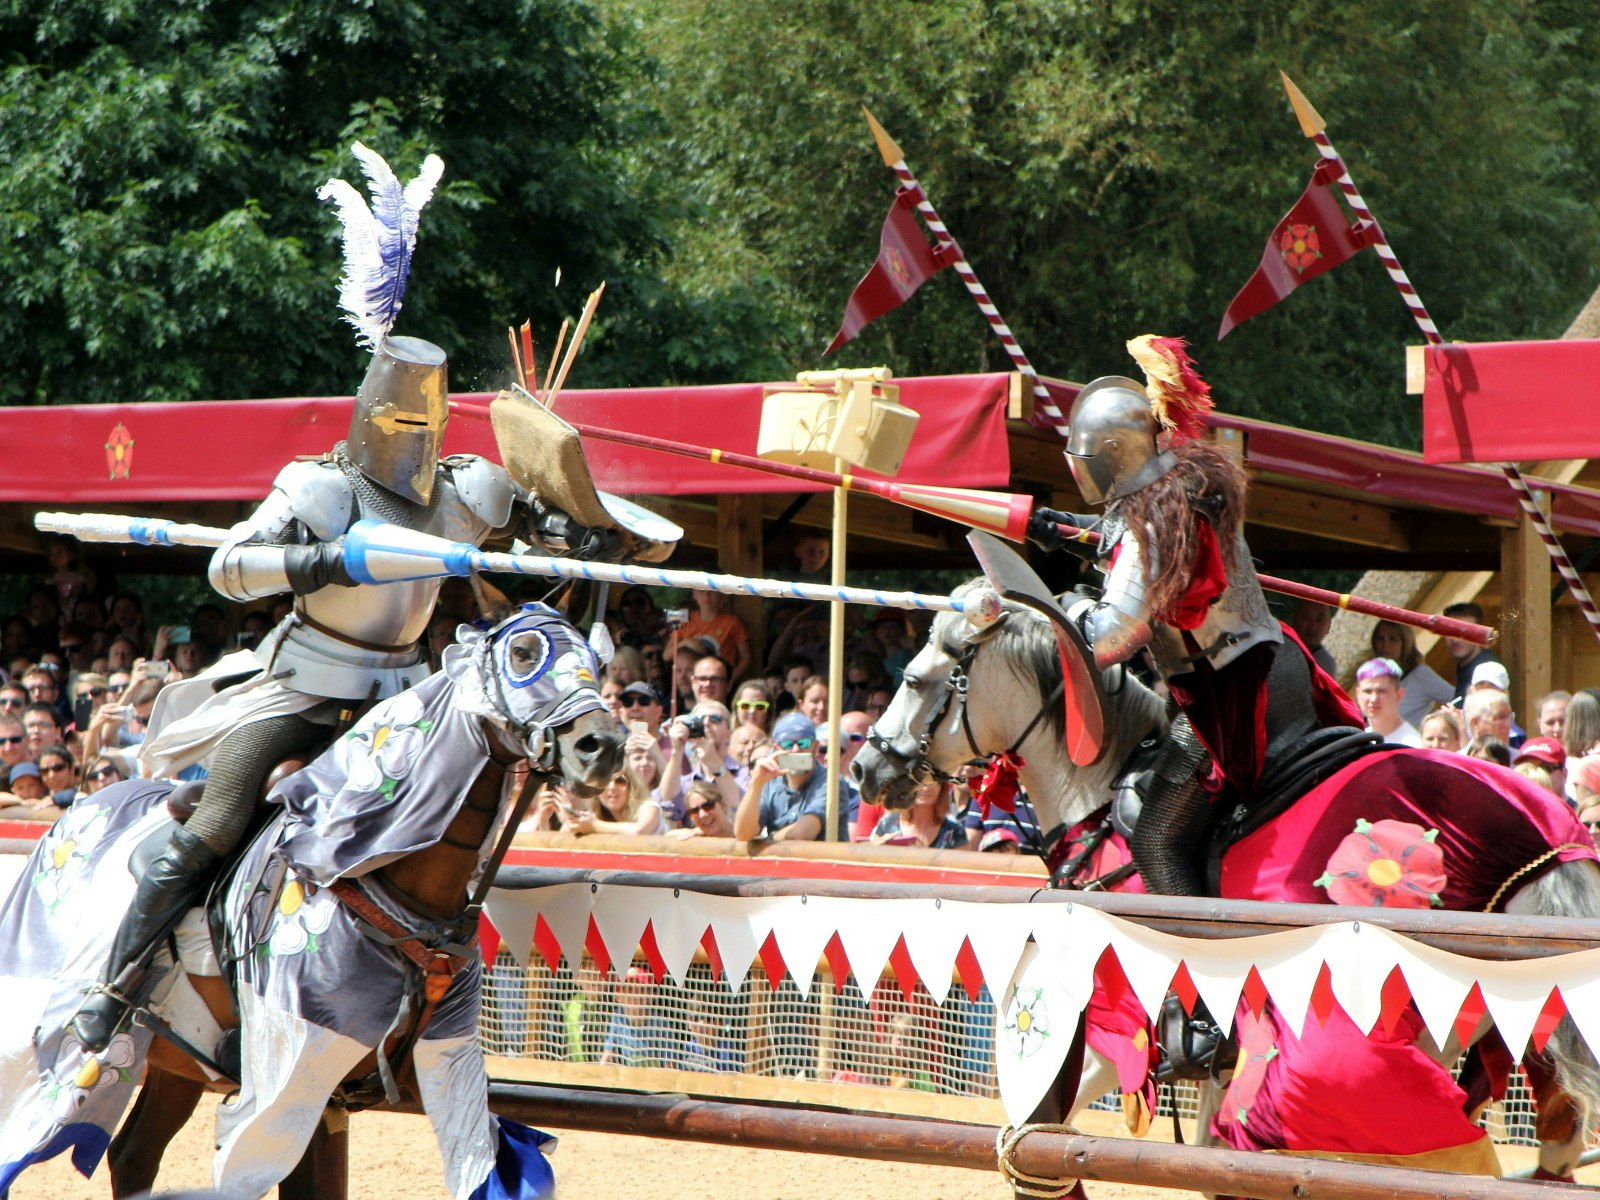 A jousting tournament at Warwick Castle